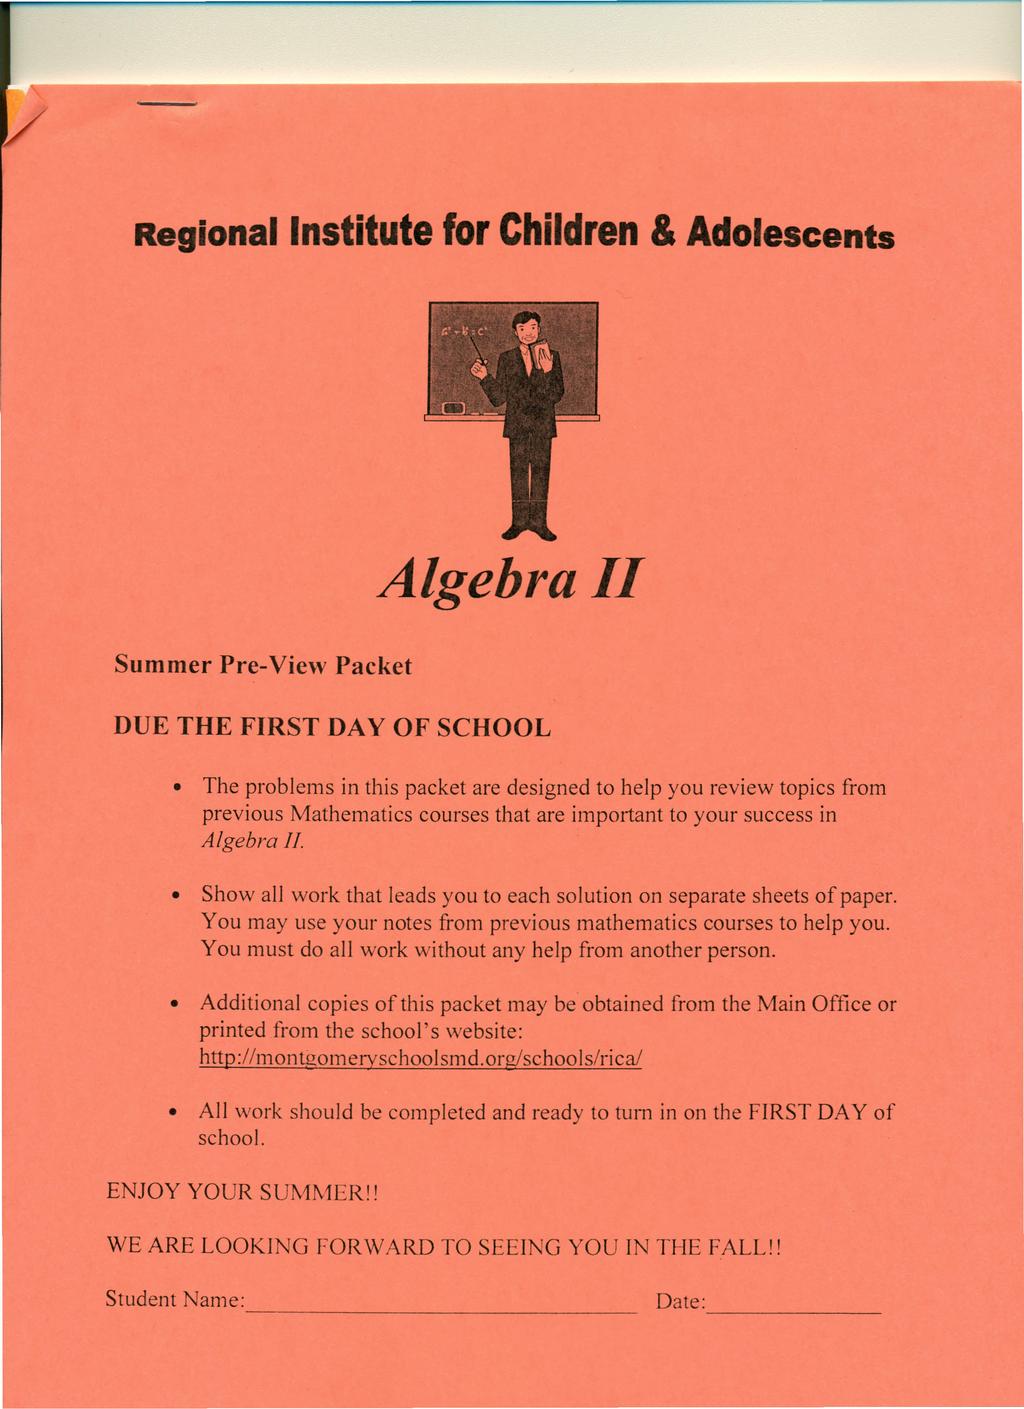 Regional Institute for Children & Adolescents Summer Pre-View Packet Algebra II DUE THE FIRST DAY OF SCHOOL The problems in this packet are designed to help you review topics from previous